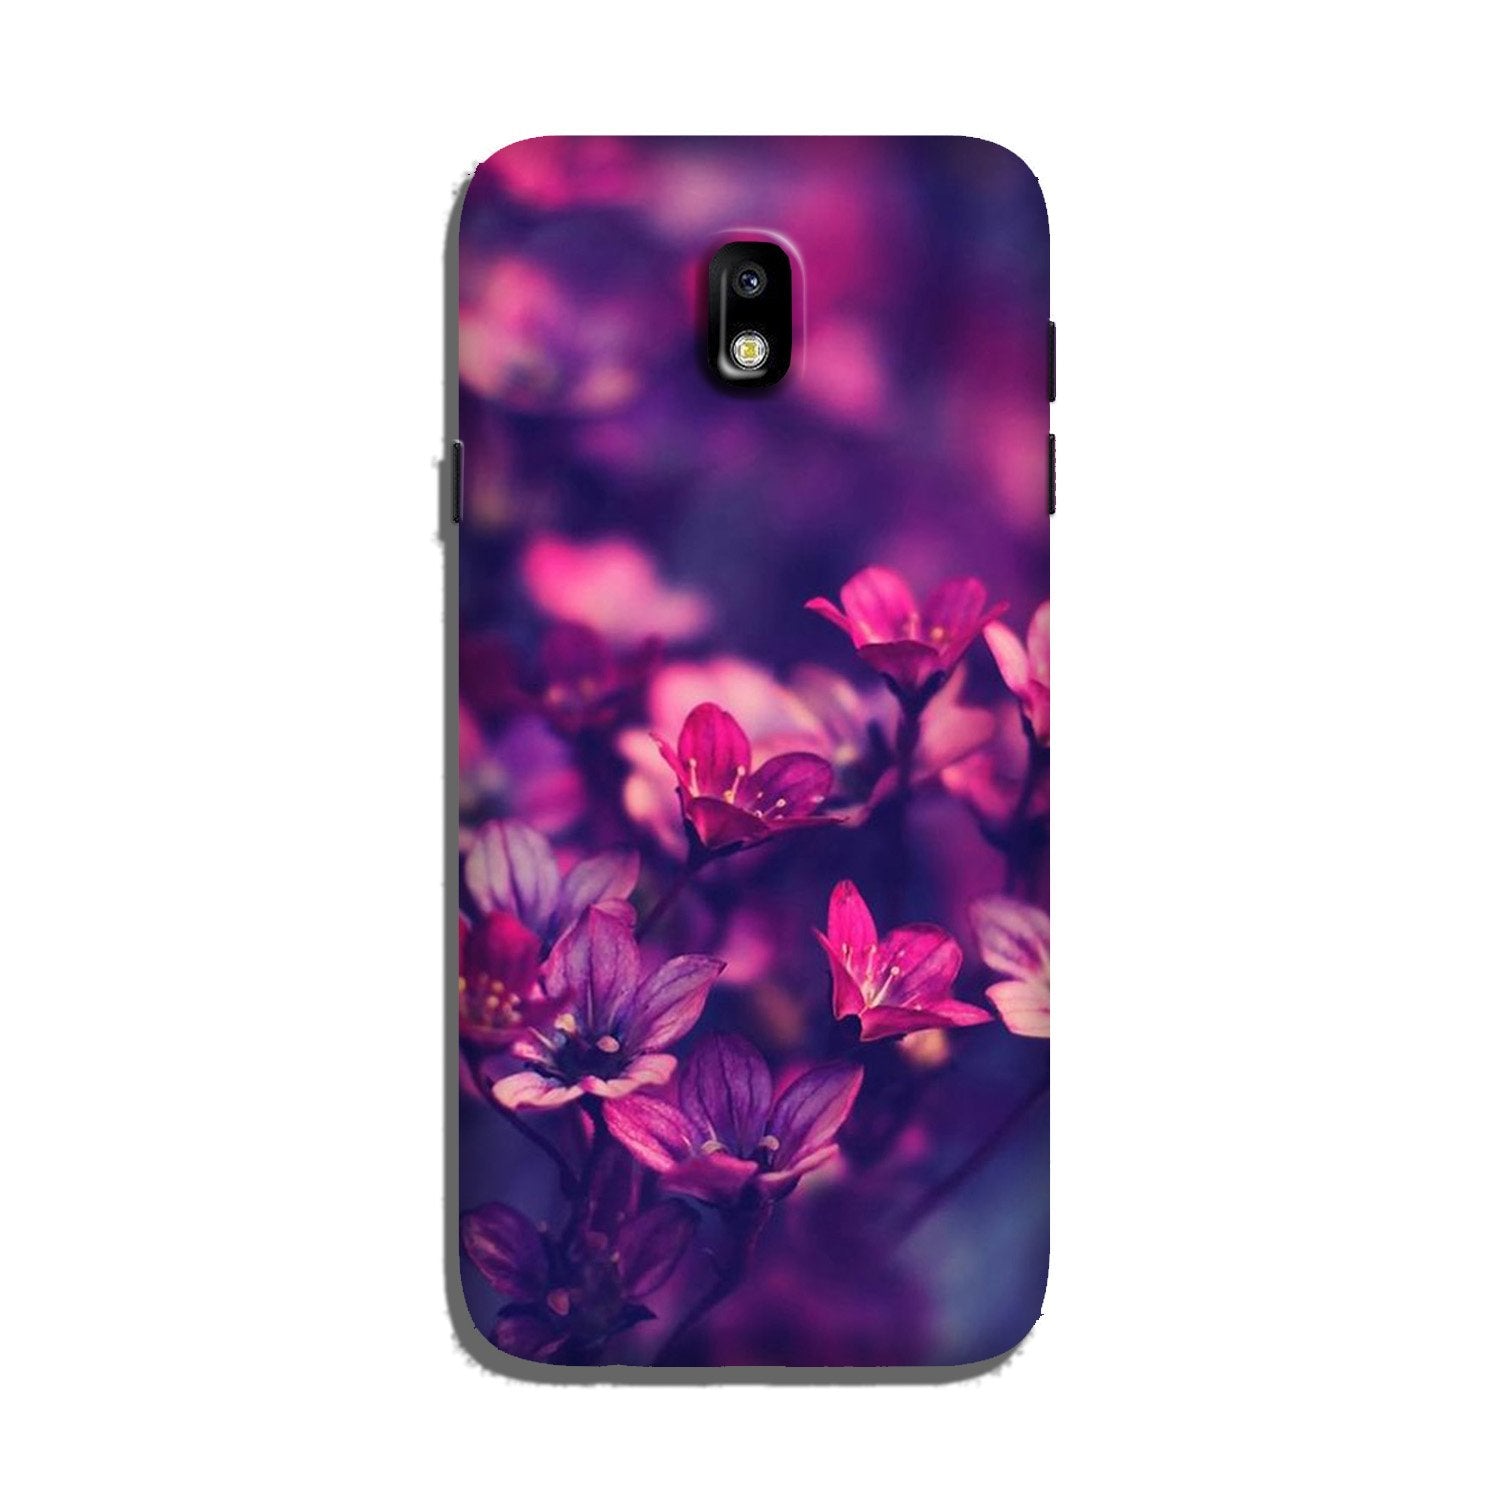 flowers Case for Galaxy J5 Pro